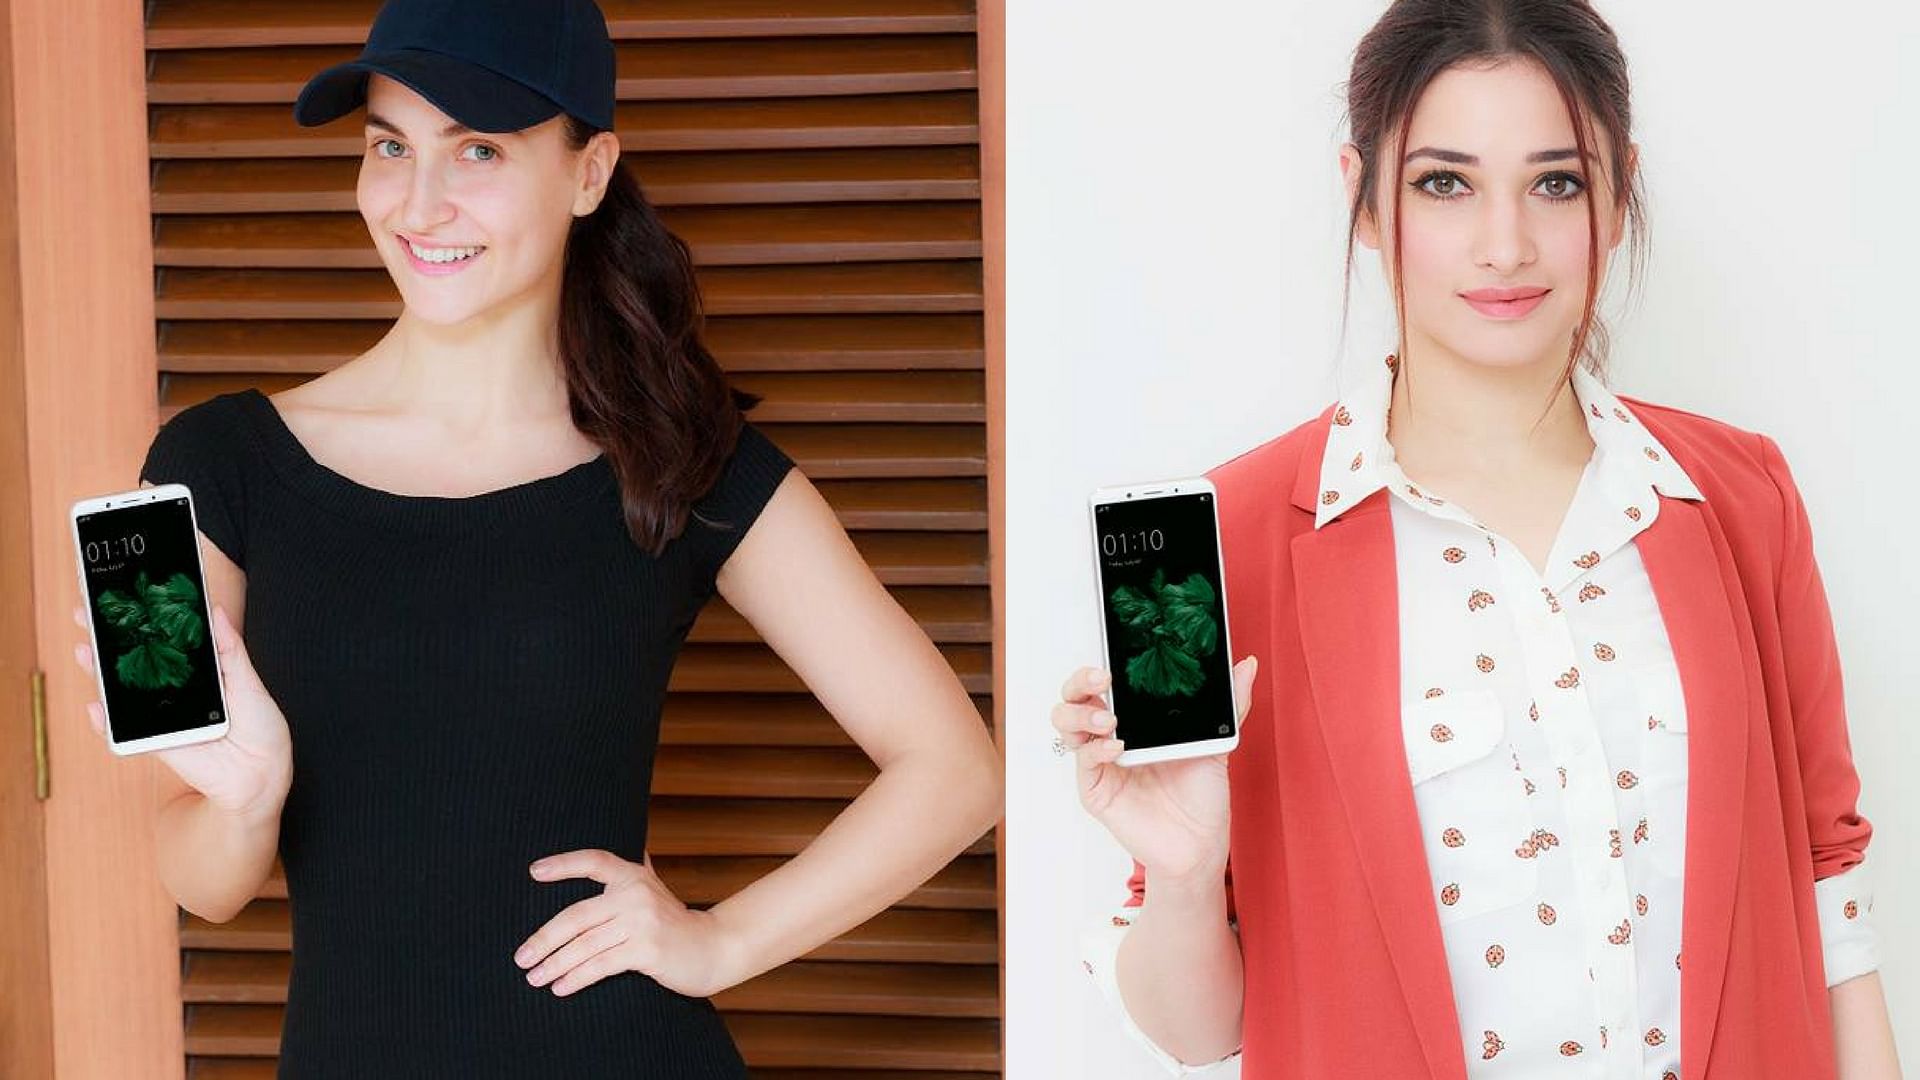 Elli AvrRam and Tamannaah flaunt the newest selfie expert in town - OPPO F5